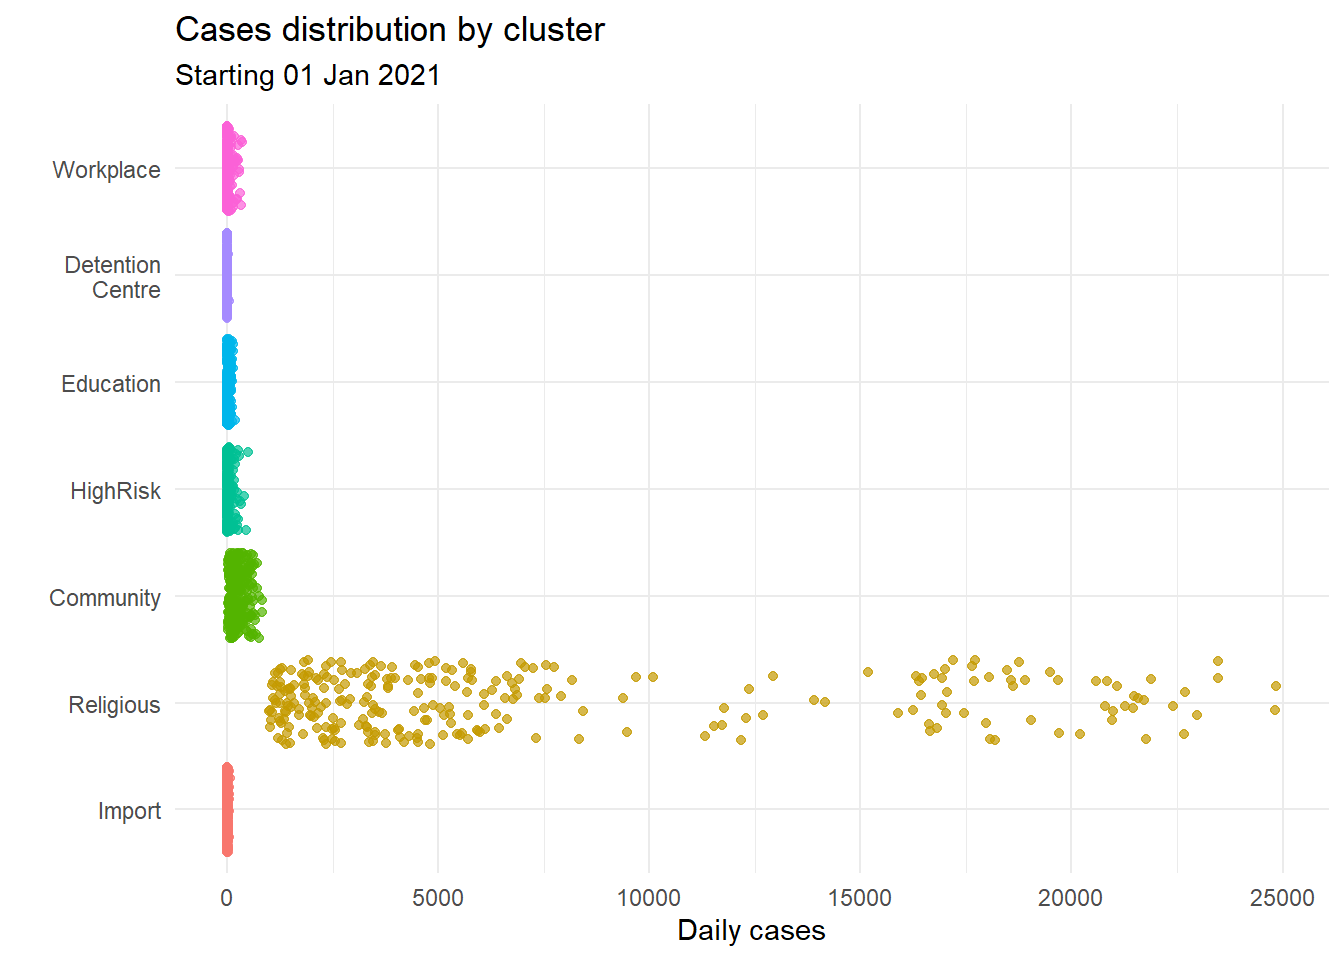 Jitter plot with cluster categories by color